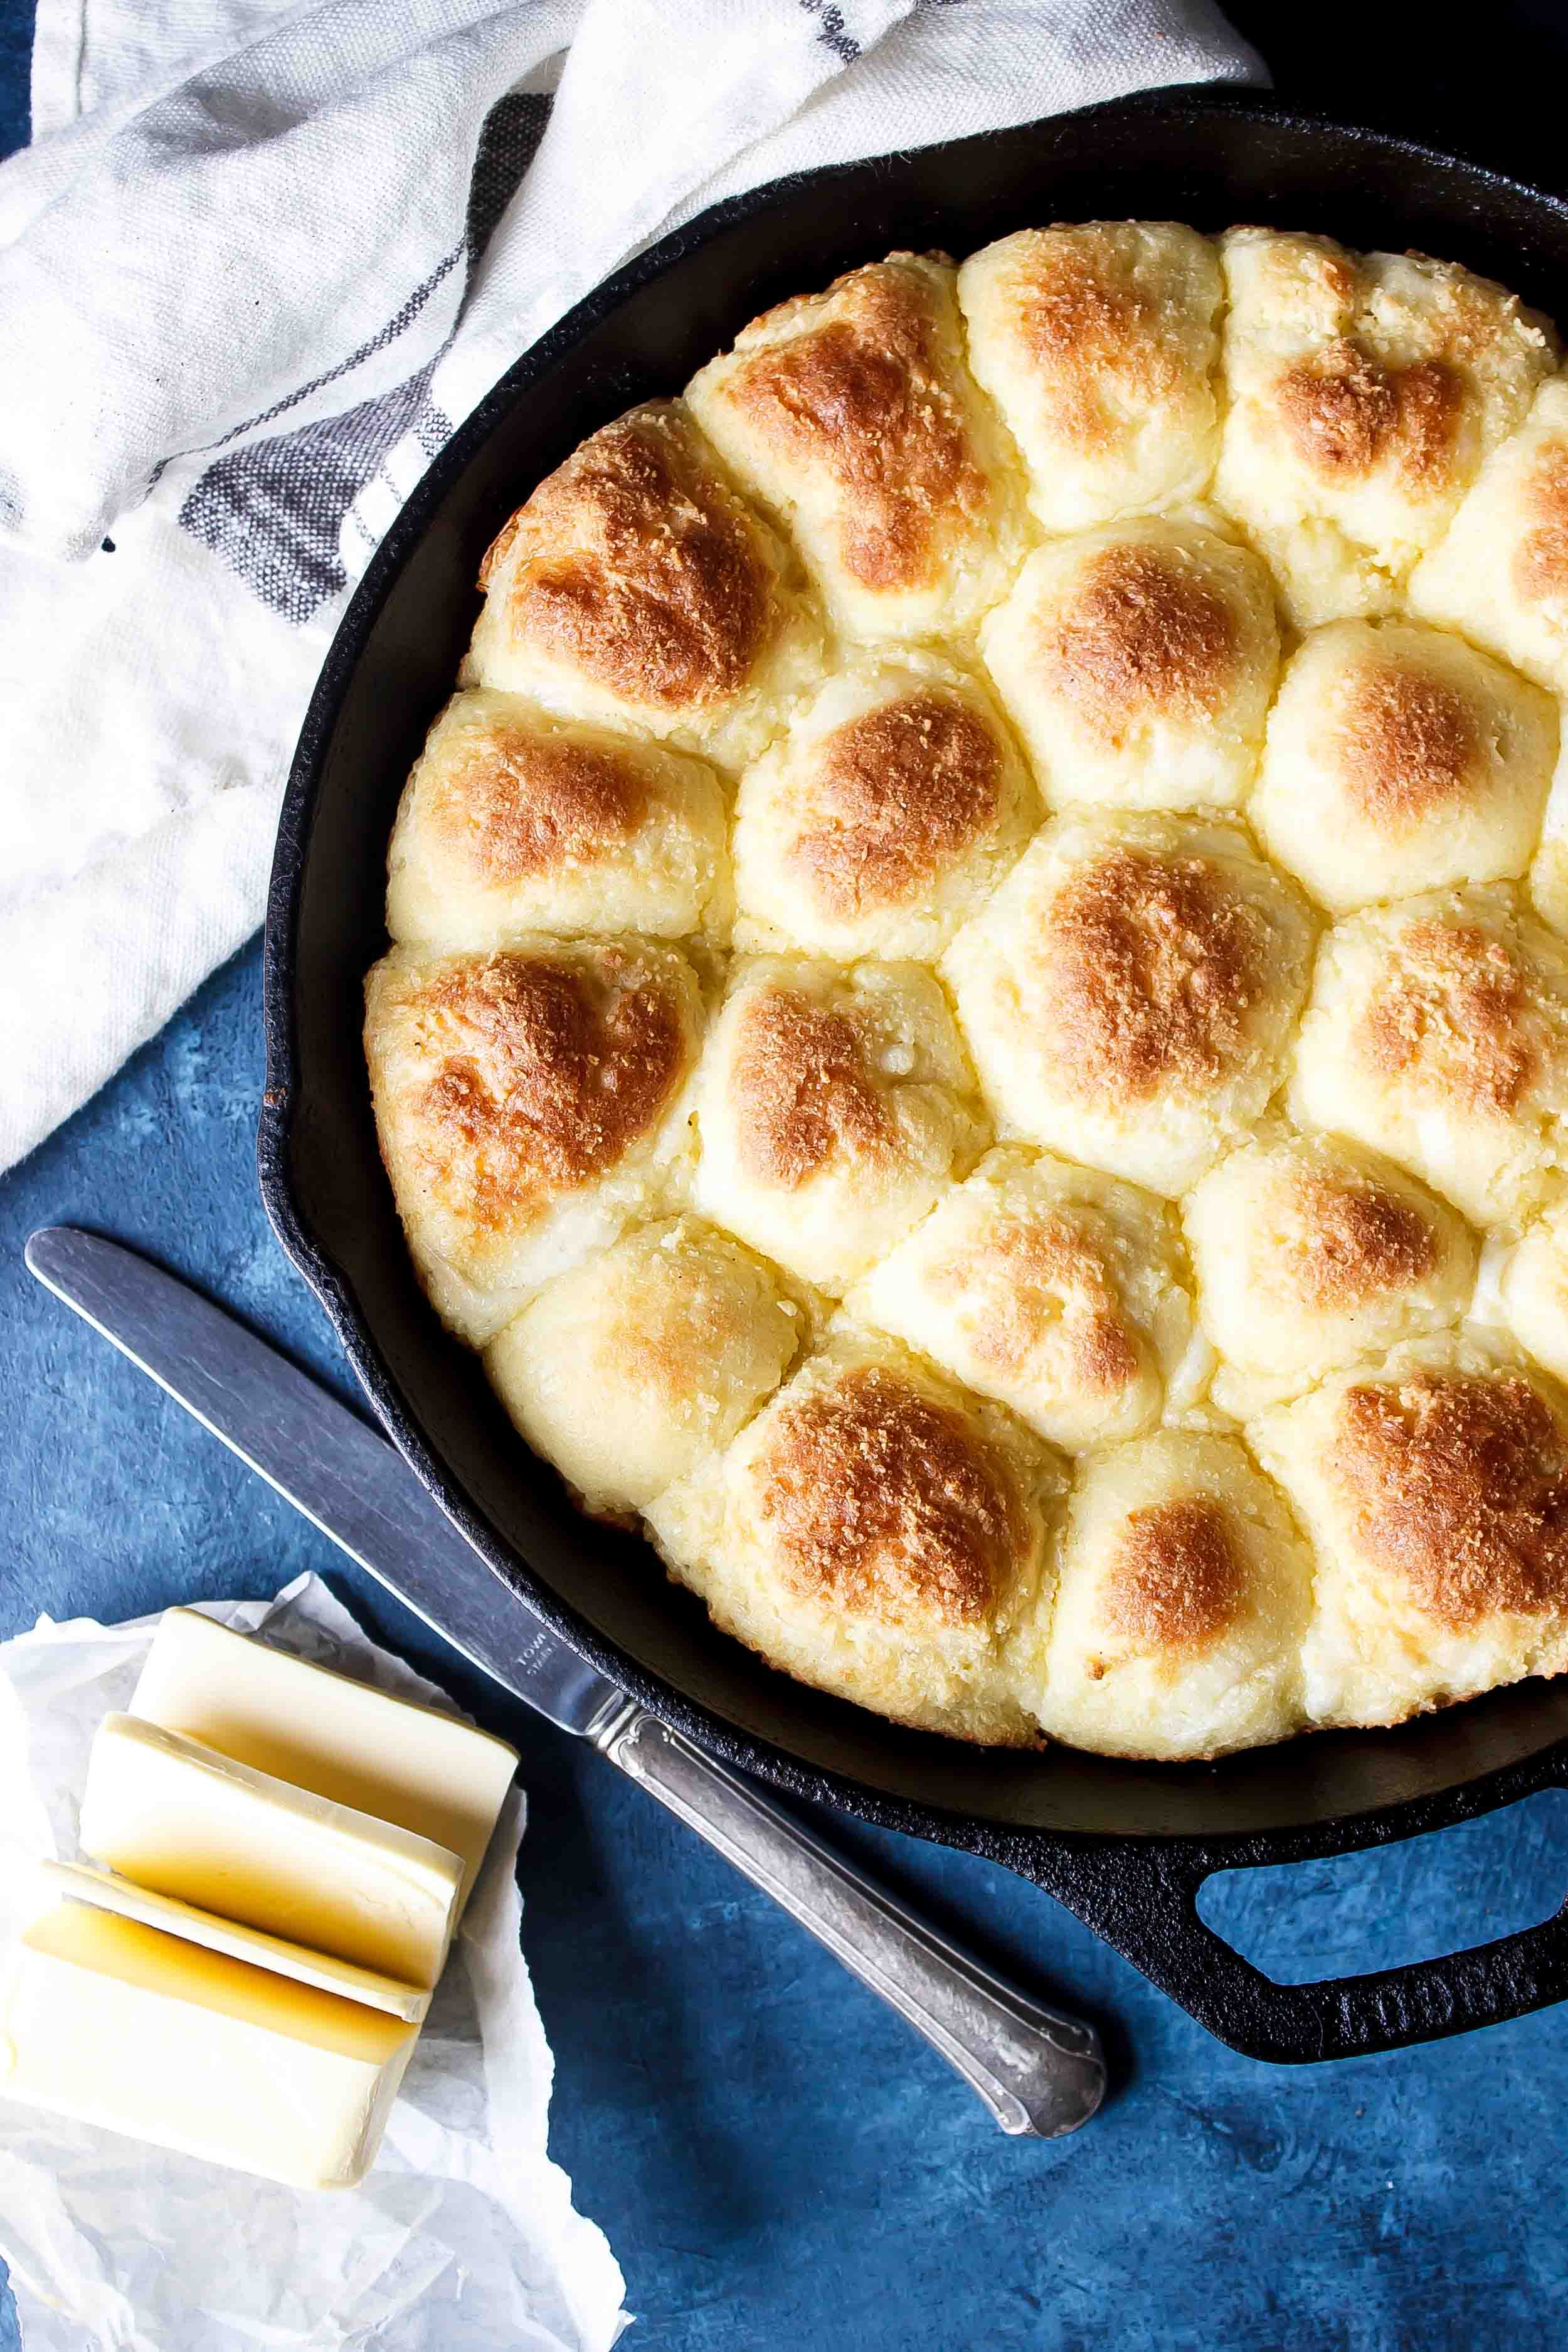 baked rolls in cast iron skillet with knife and butter